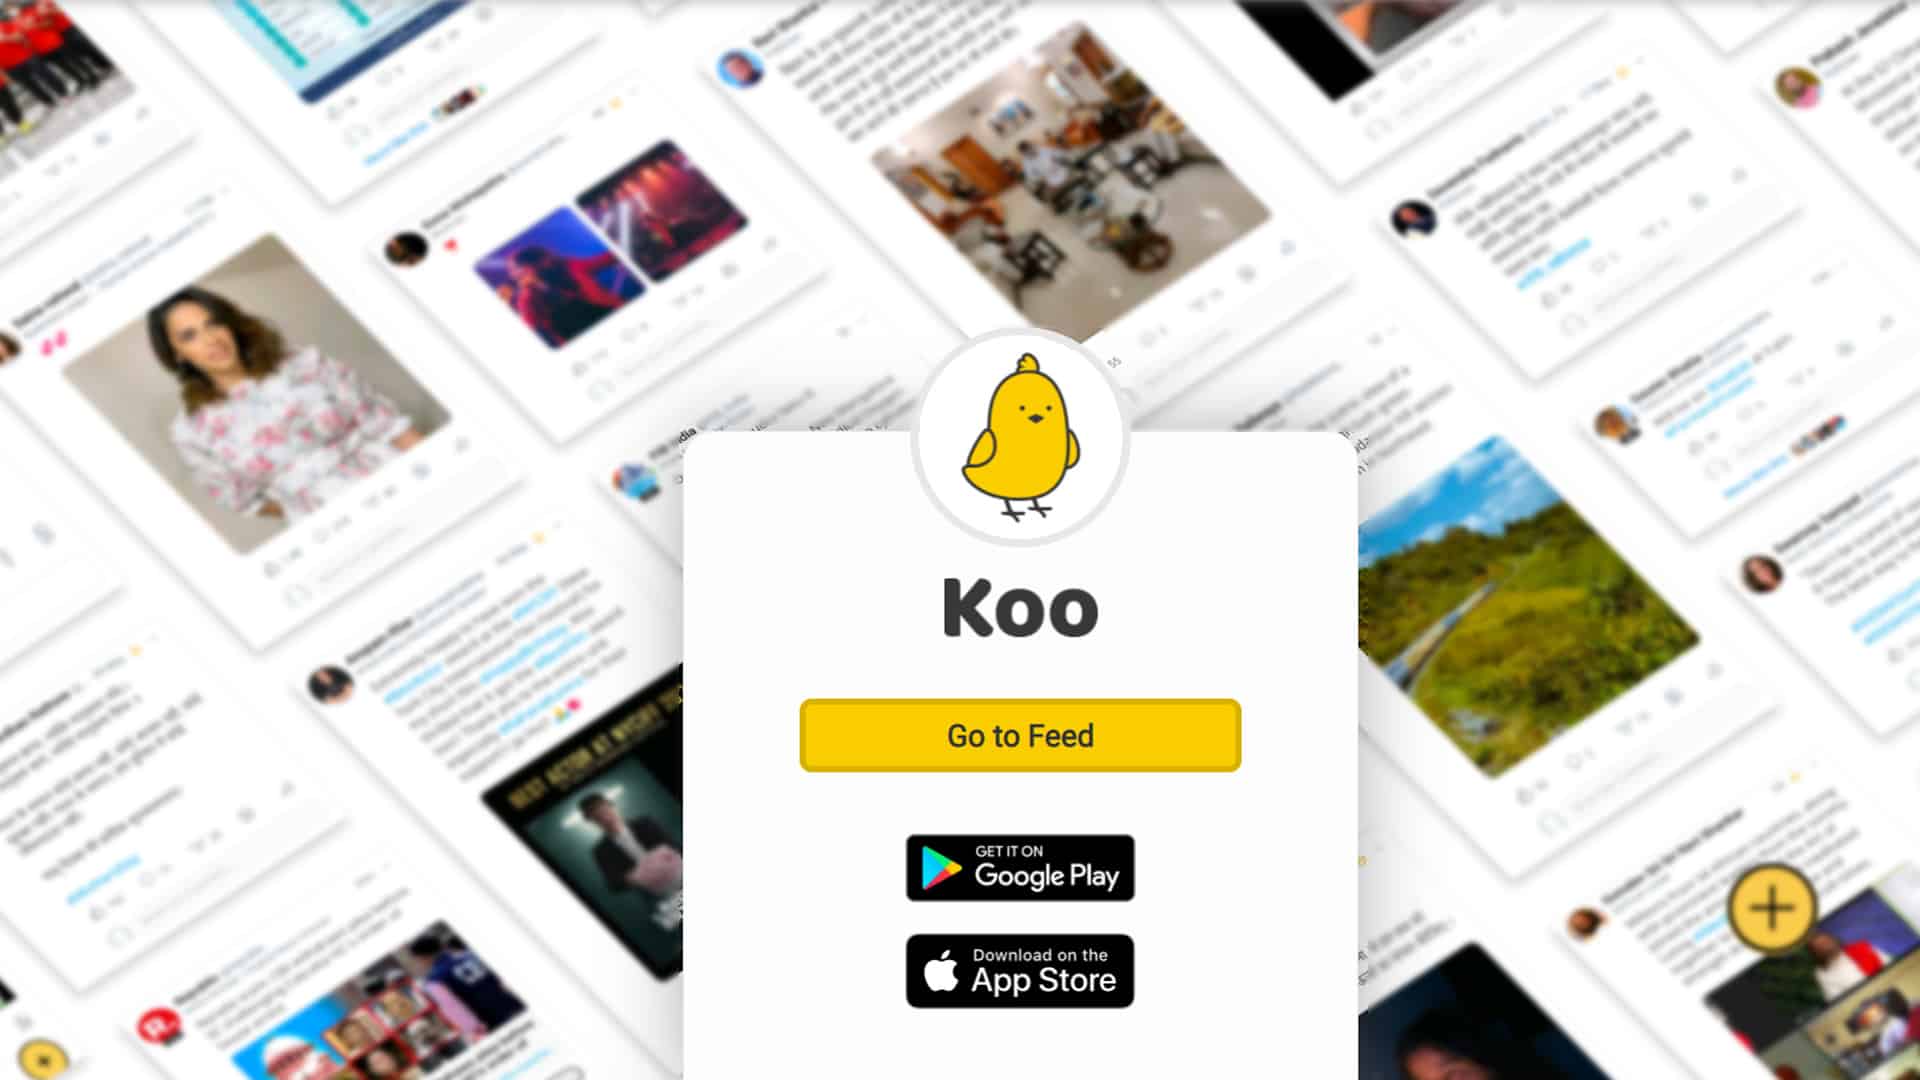 Moderated over 54,000 content pieces, 5,502 Koos reported by users in June: Koo